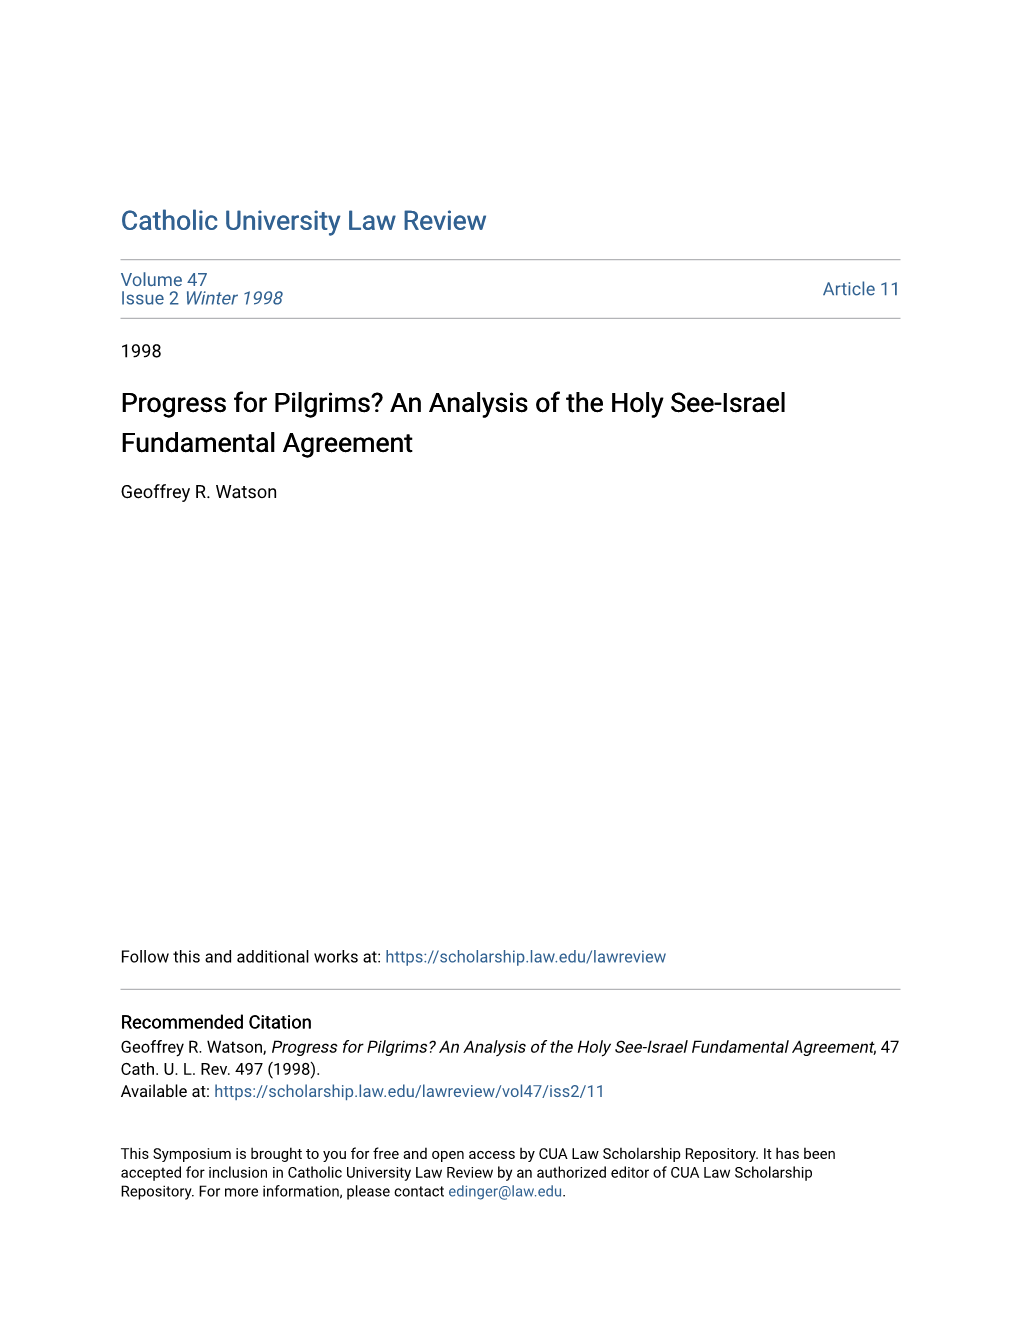 Progress for Pilgrims? an Analysis of the Holy See-Israel Fundamental Agreement